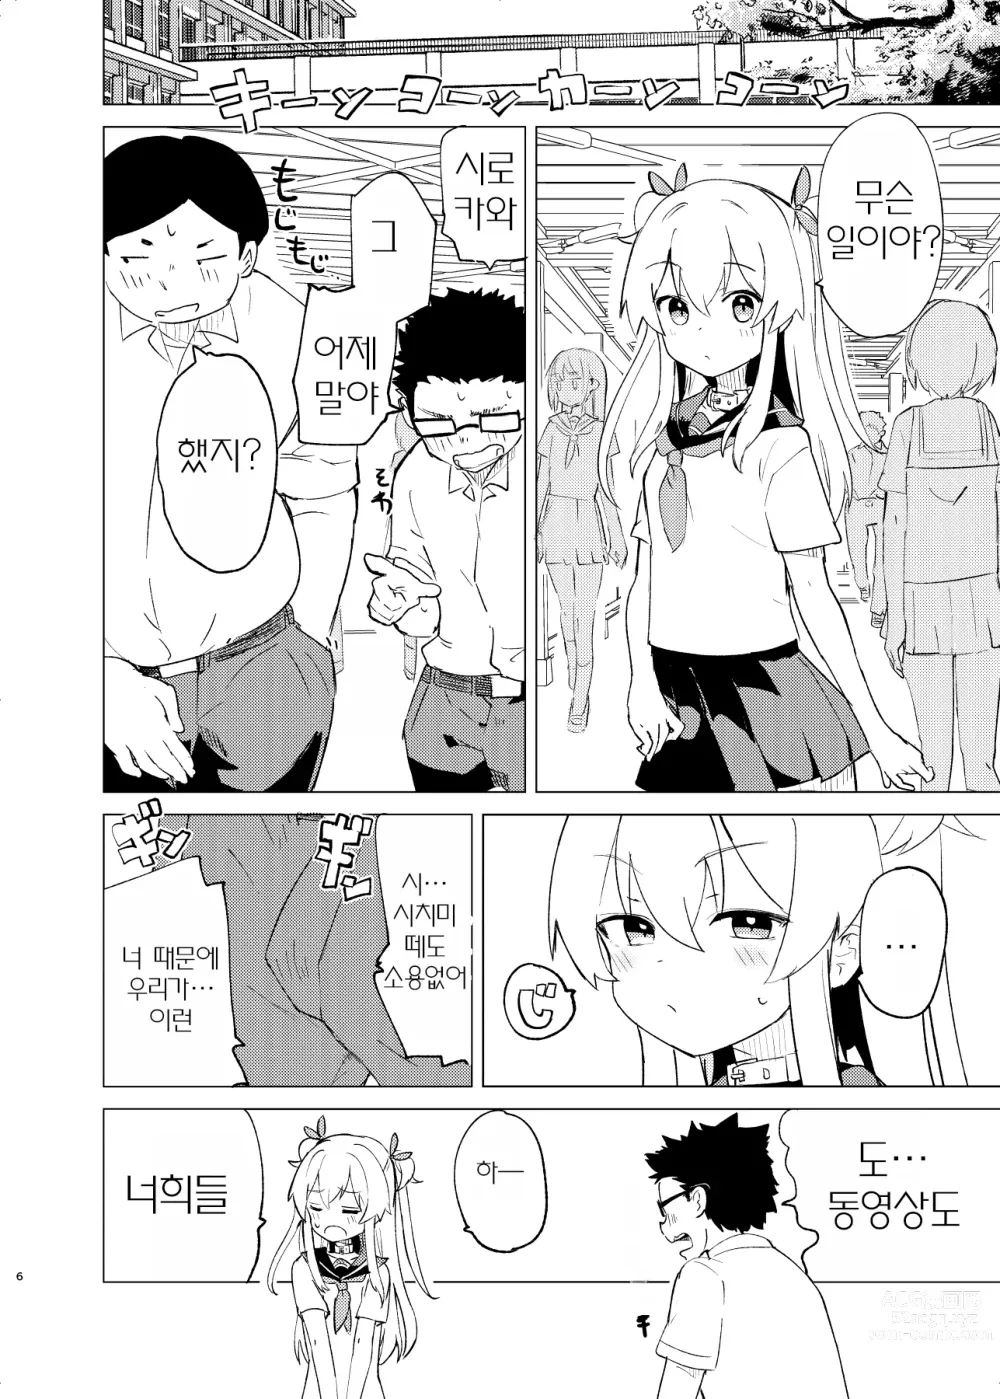 Page 5 of doujinshi S.S.S.DI2